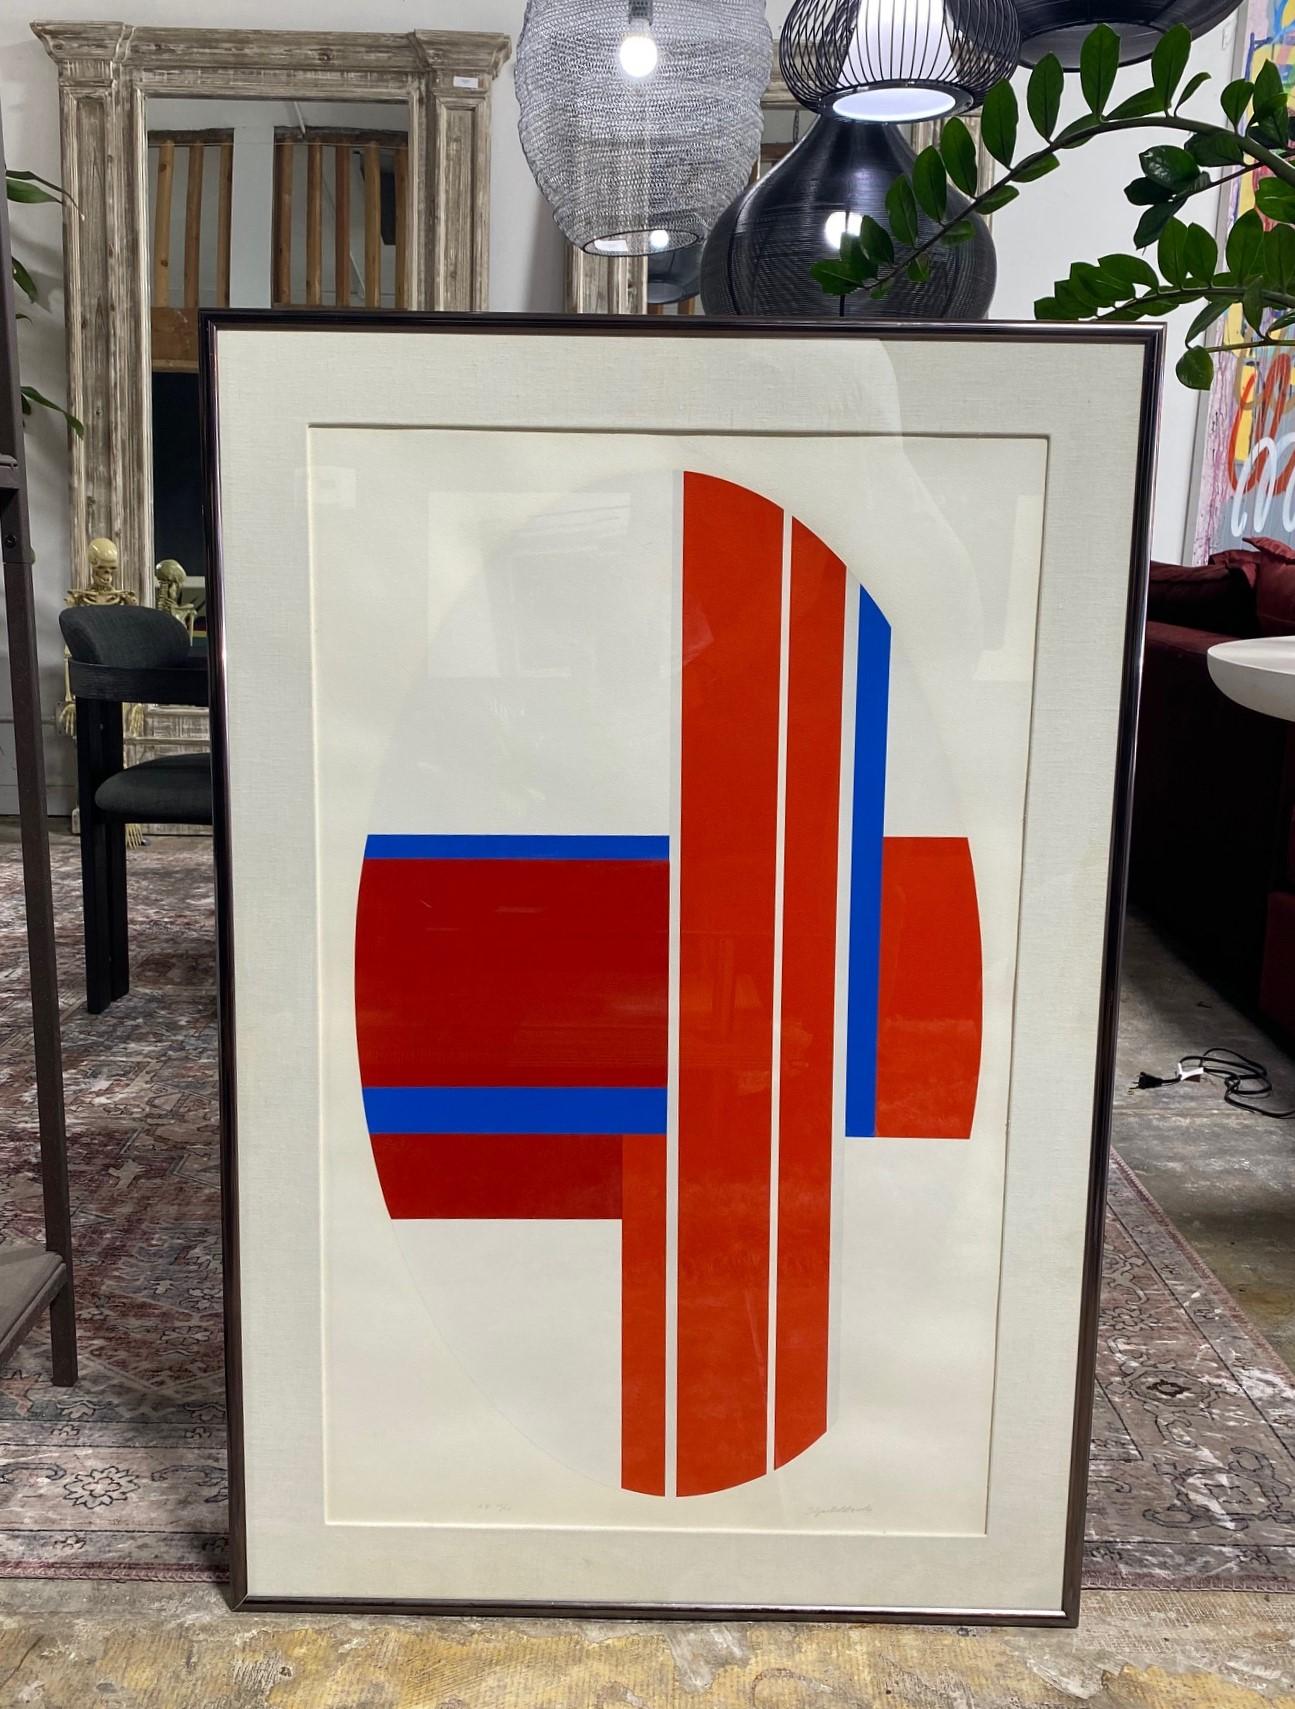 A large and rather fantastic geometrical abstract silkscreen print by Russian-born/ American artist Ilya Bolotowsky (1907-1981). This work often referred to as 